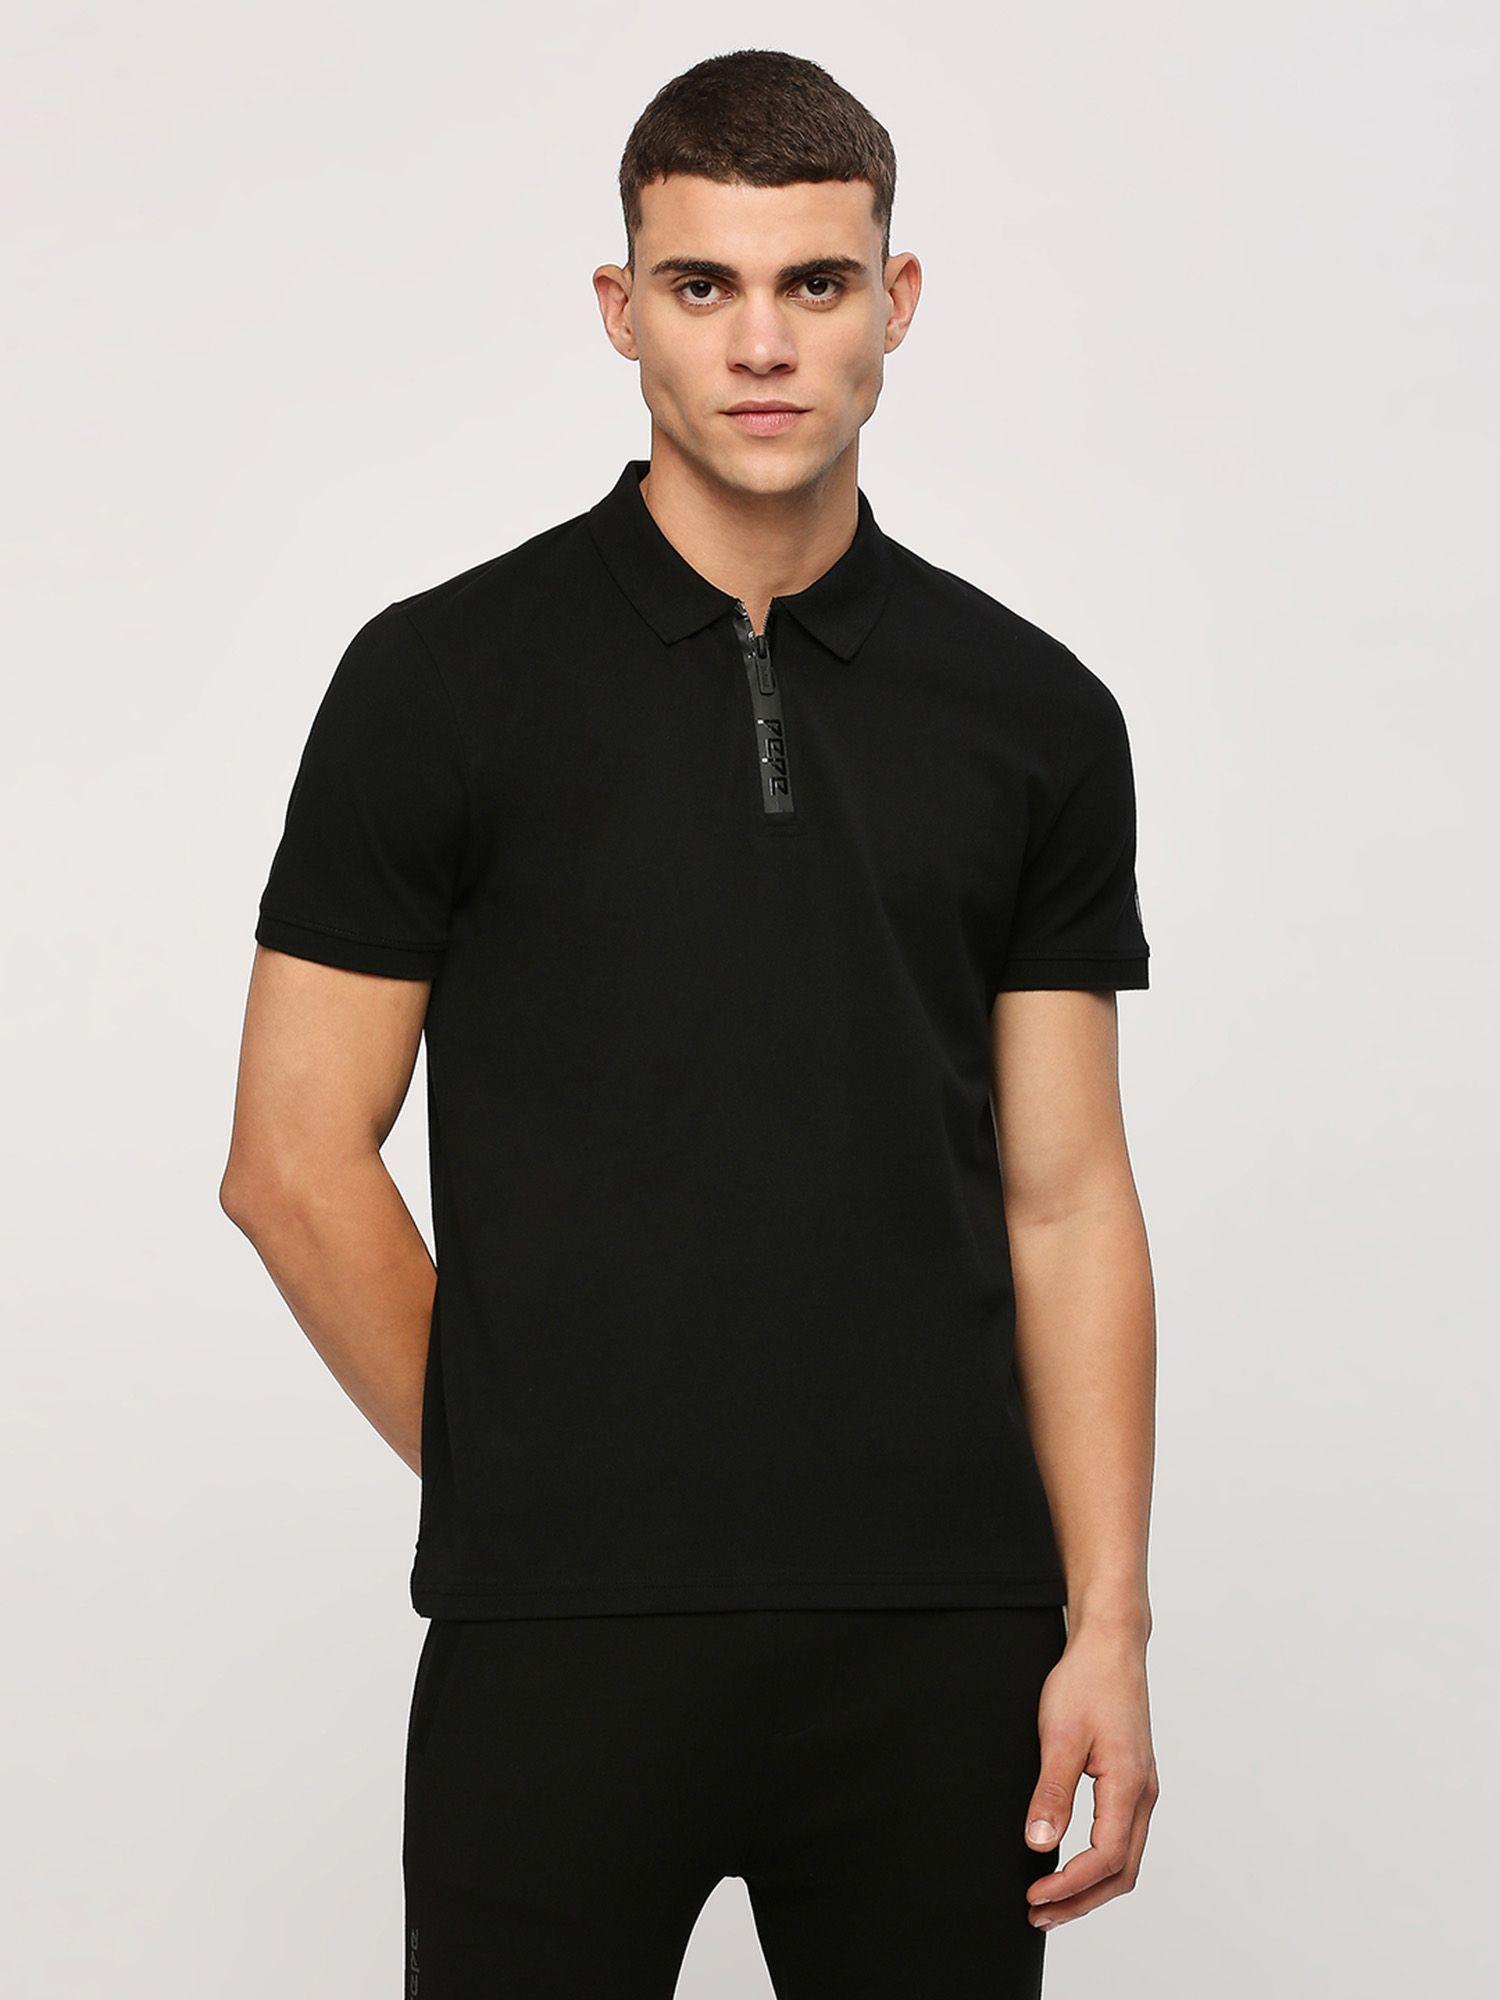 Black Solid Neck Short Sleeves Polo T-Shirt